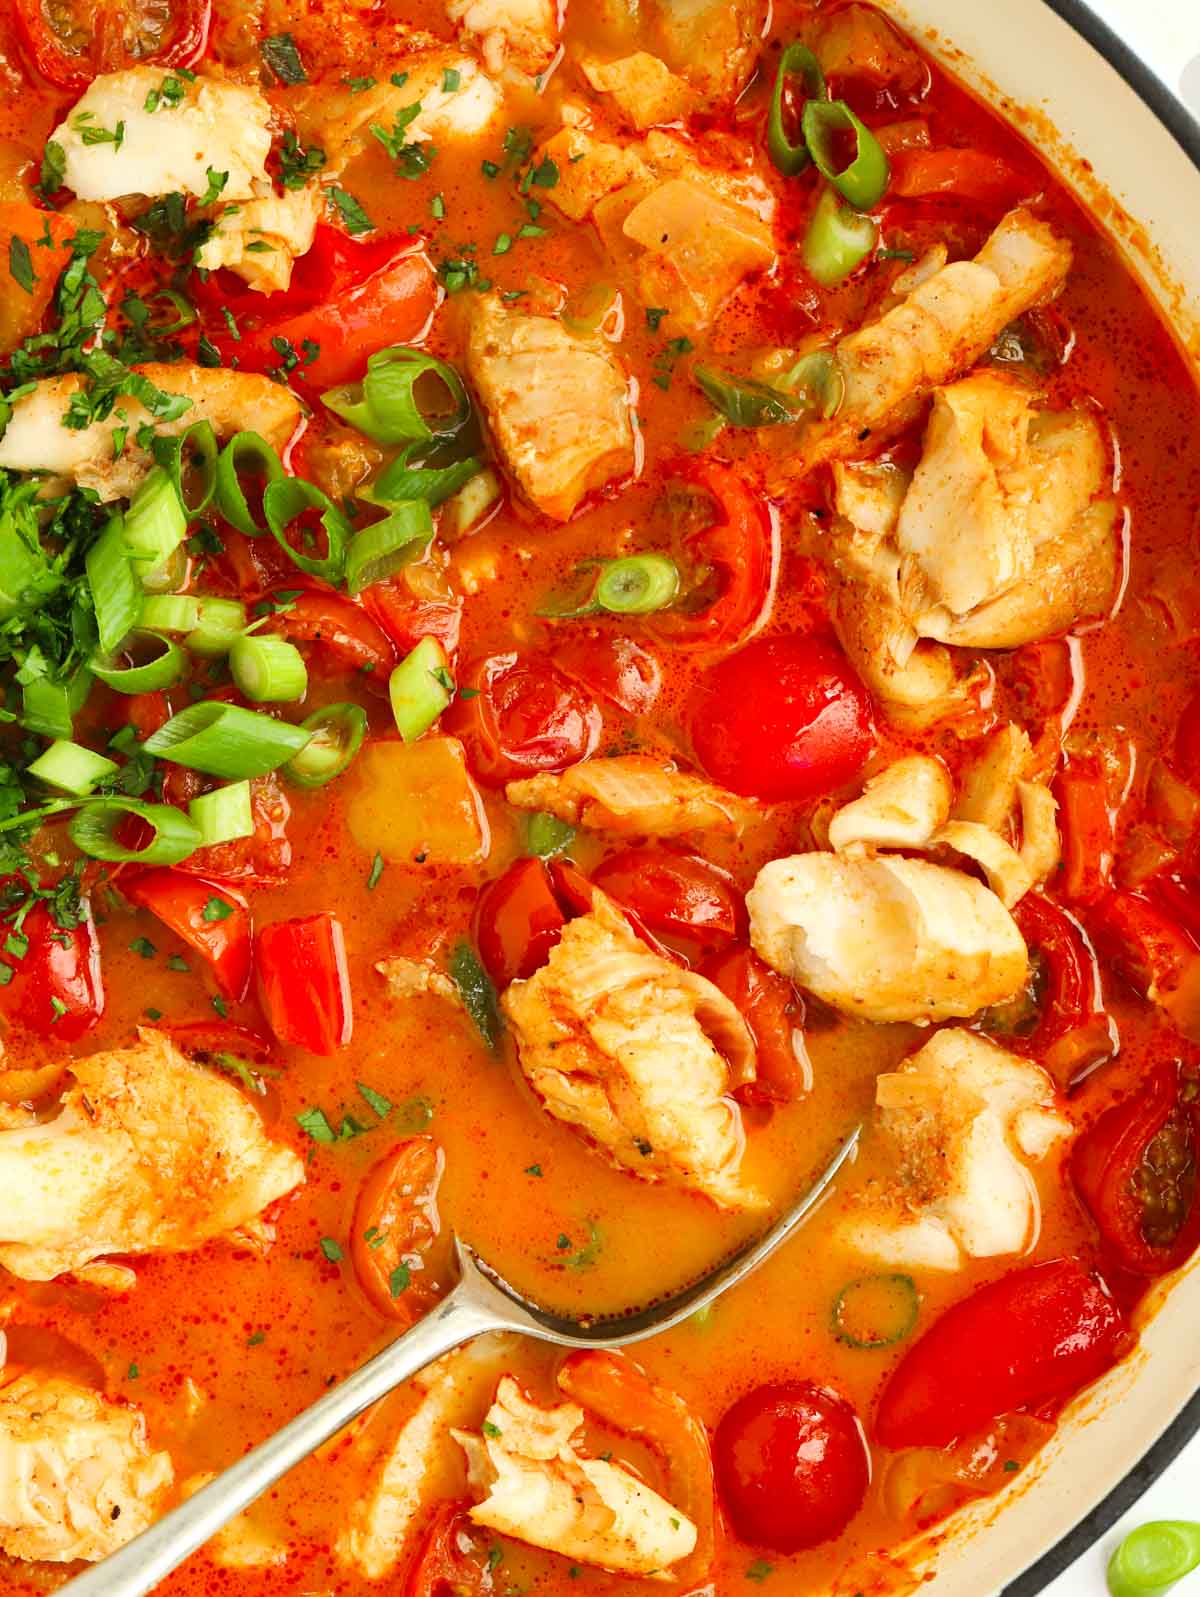 Simple Moqueca-style fish stew recipe. A big bowl of it ready to serve.